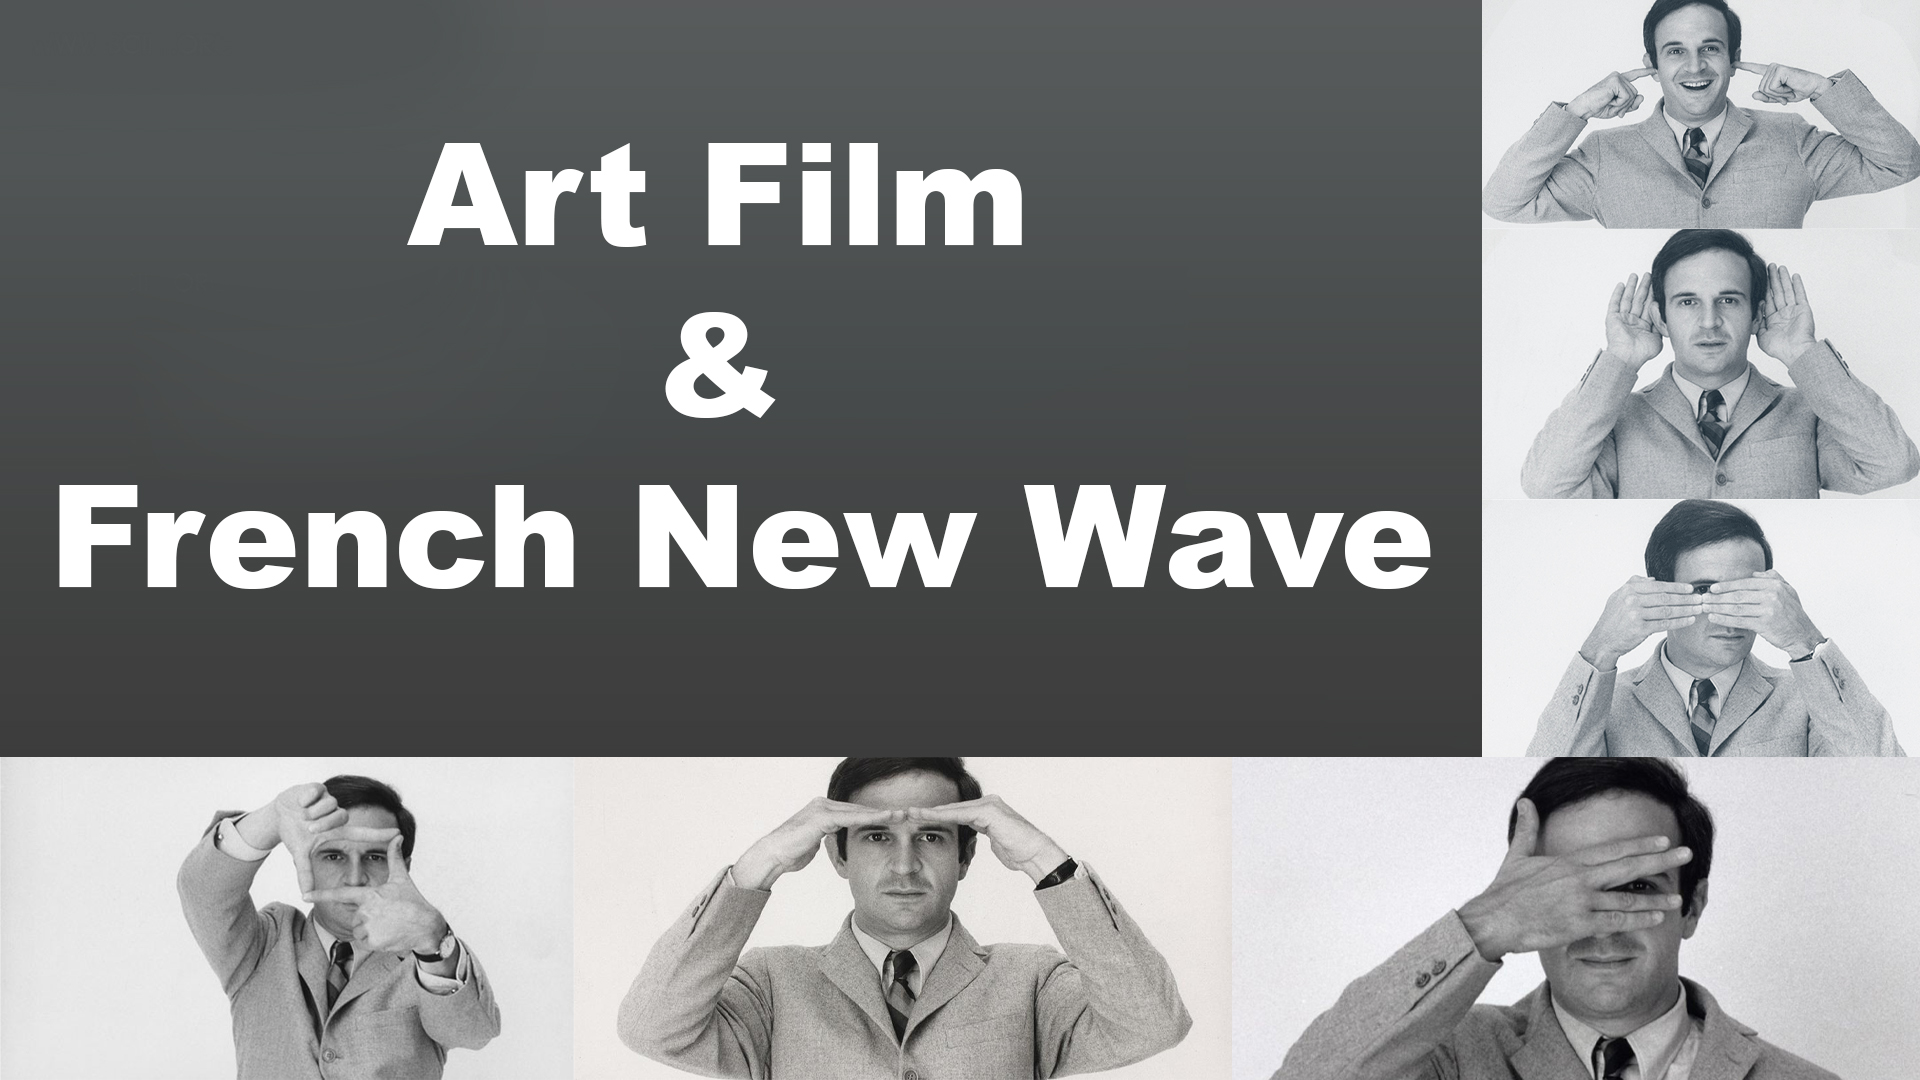 Impact of the French New Wave in the history of Art Films